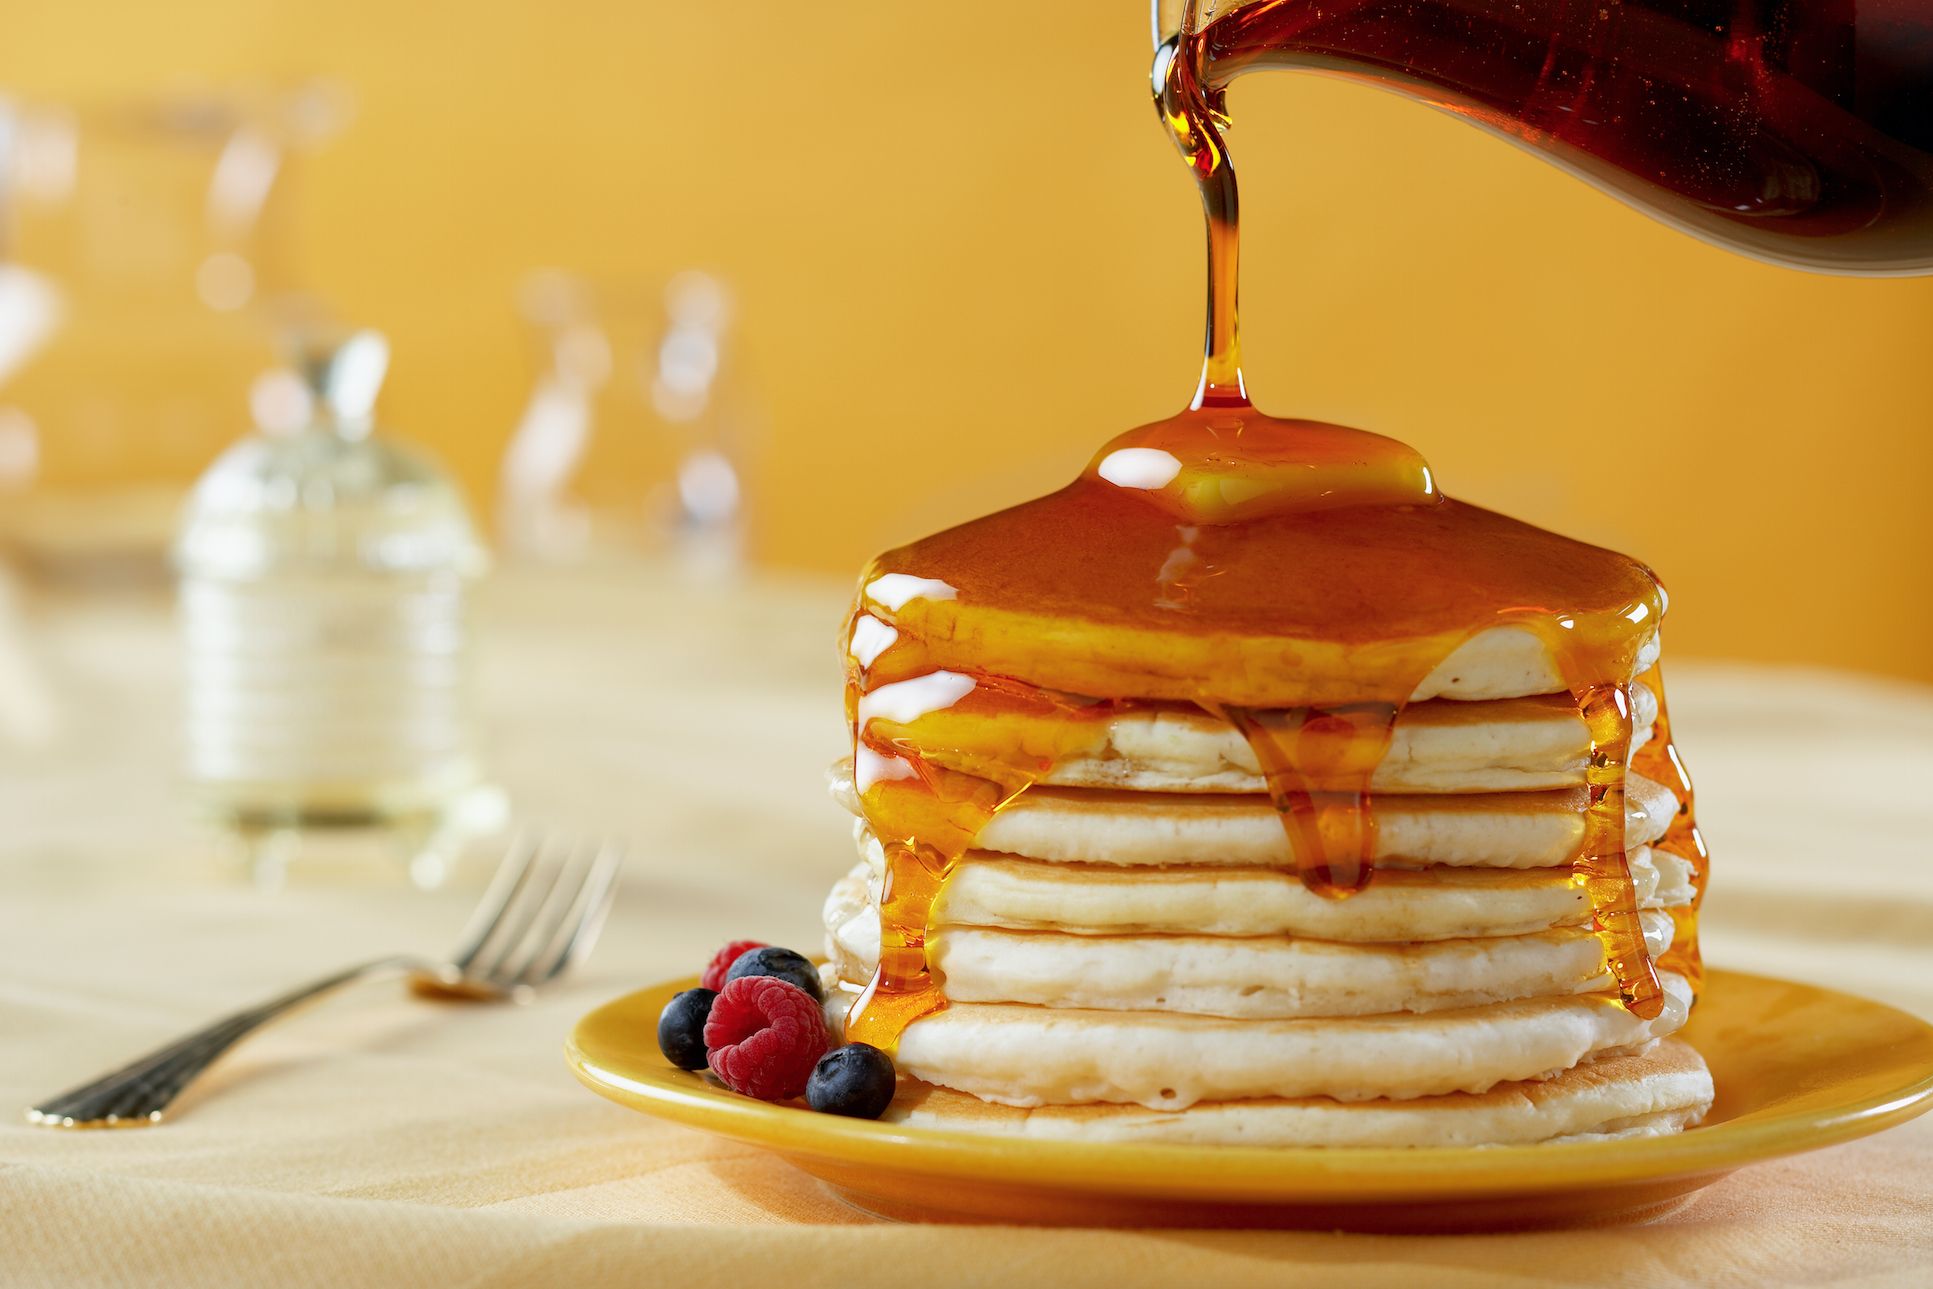 19-pancake-syrup-nutrition-facts